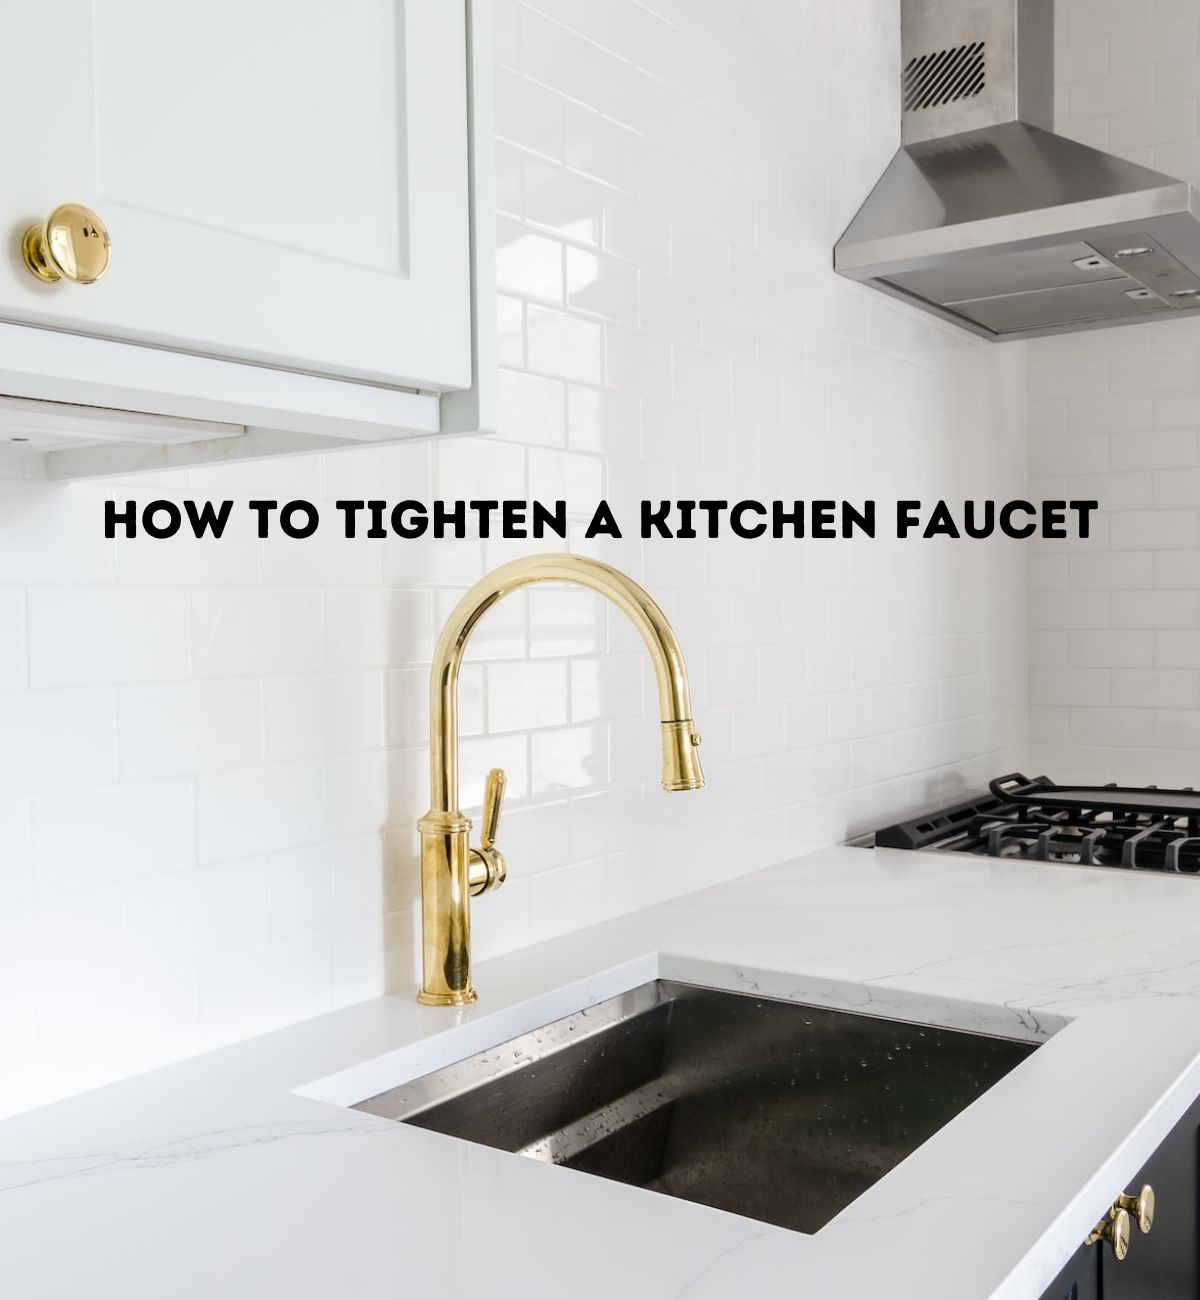 How To Tighten A Kitchen Faucet The